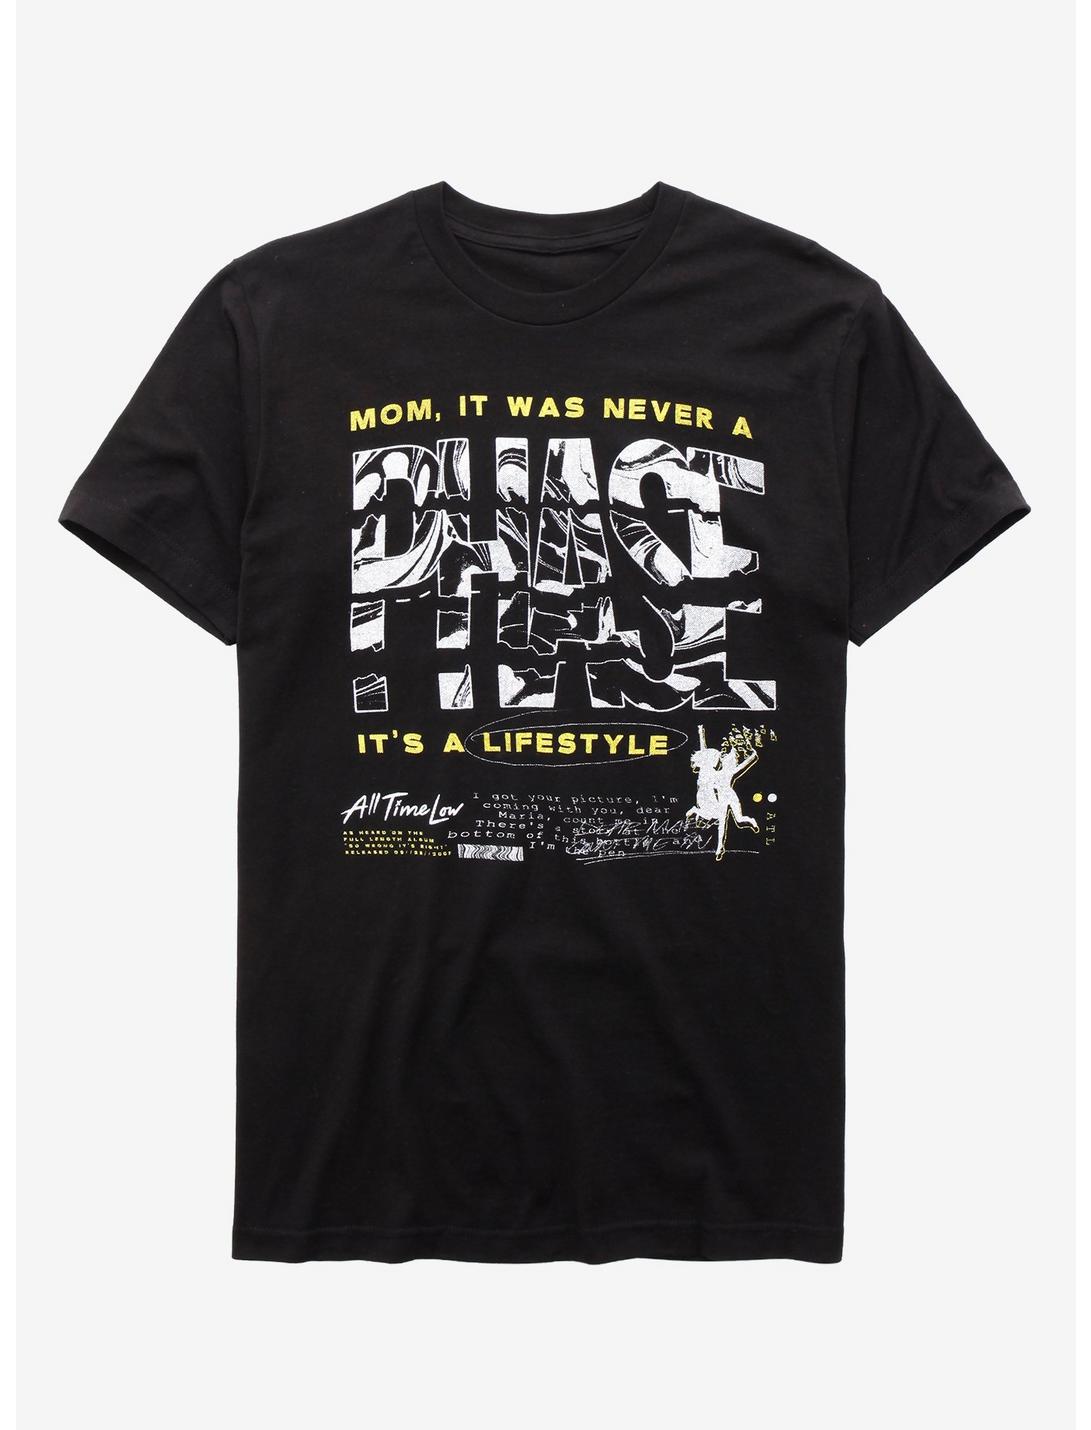 All Time Low Mom, It Was Never A Phase T-Shirt, BLACK, hi-res